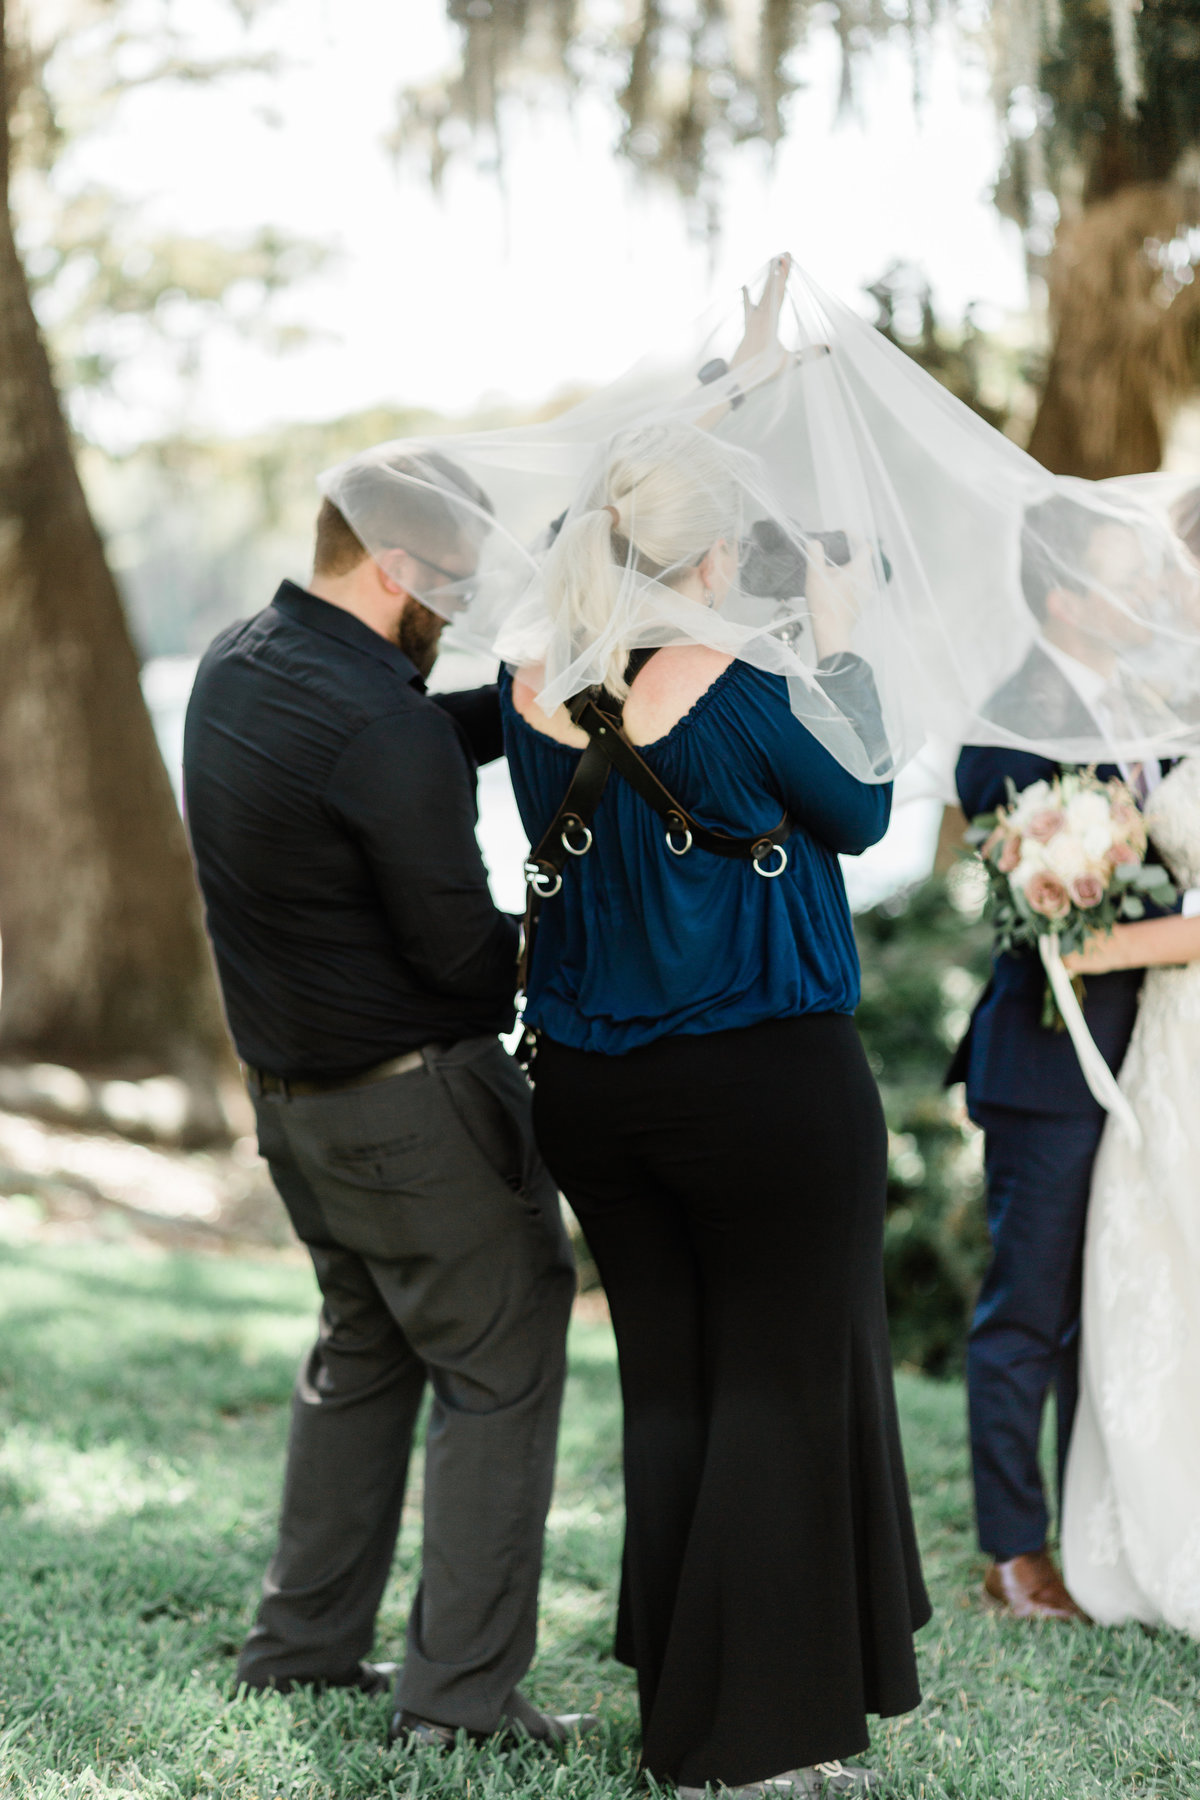 Under the veil shots are some of our favorites on a wedding day!